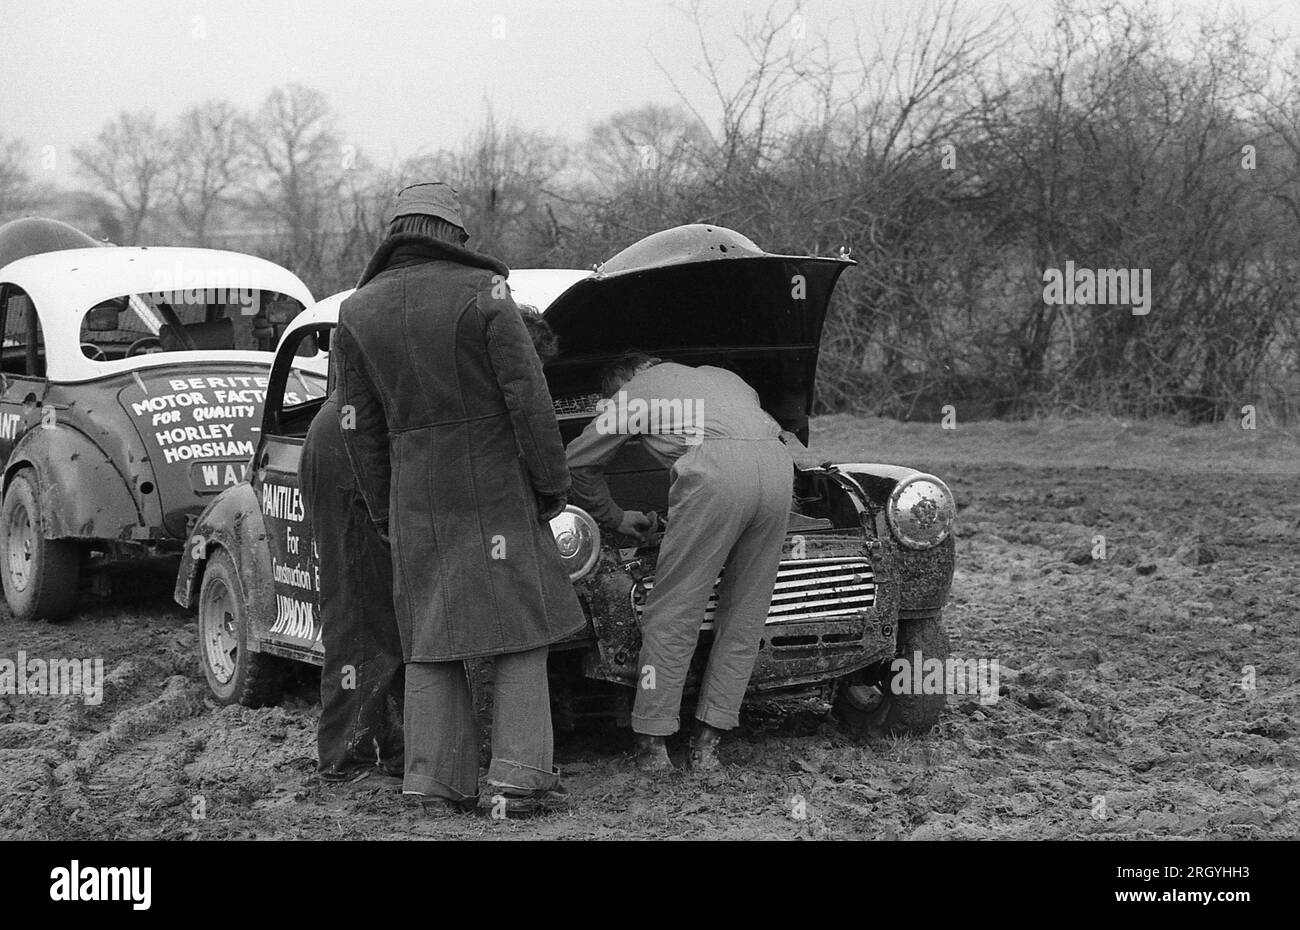 Two Morris Minor cars at an autocross event at Smallfield in Surrey, England on March 6, 1977. The car was manufactured in the UK from 1948 to 1971. Stock Photo